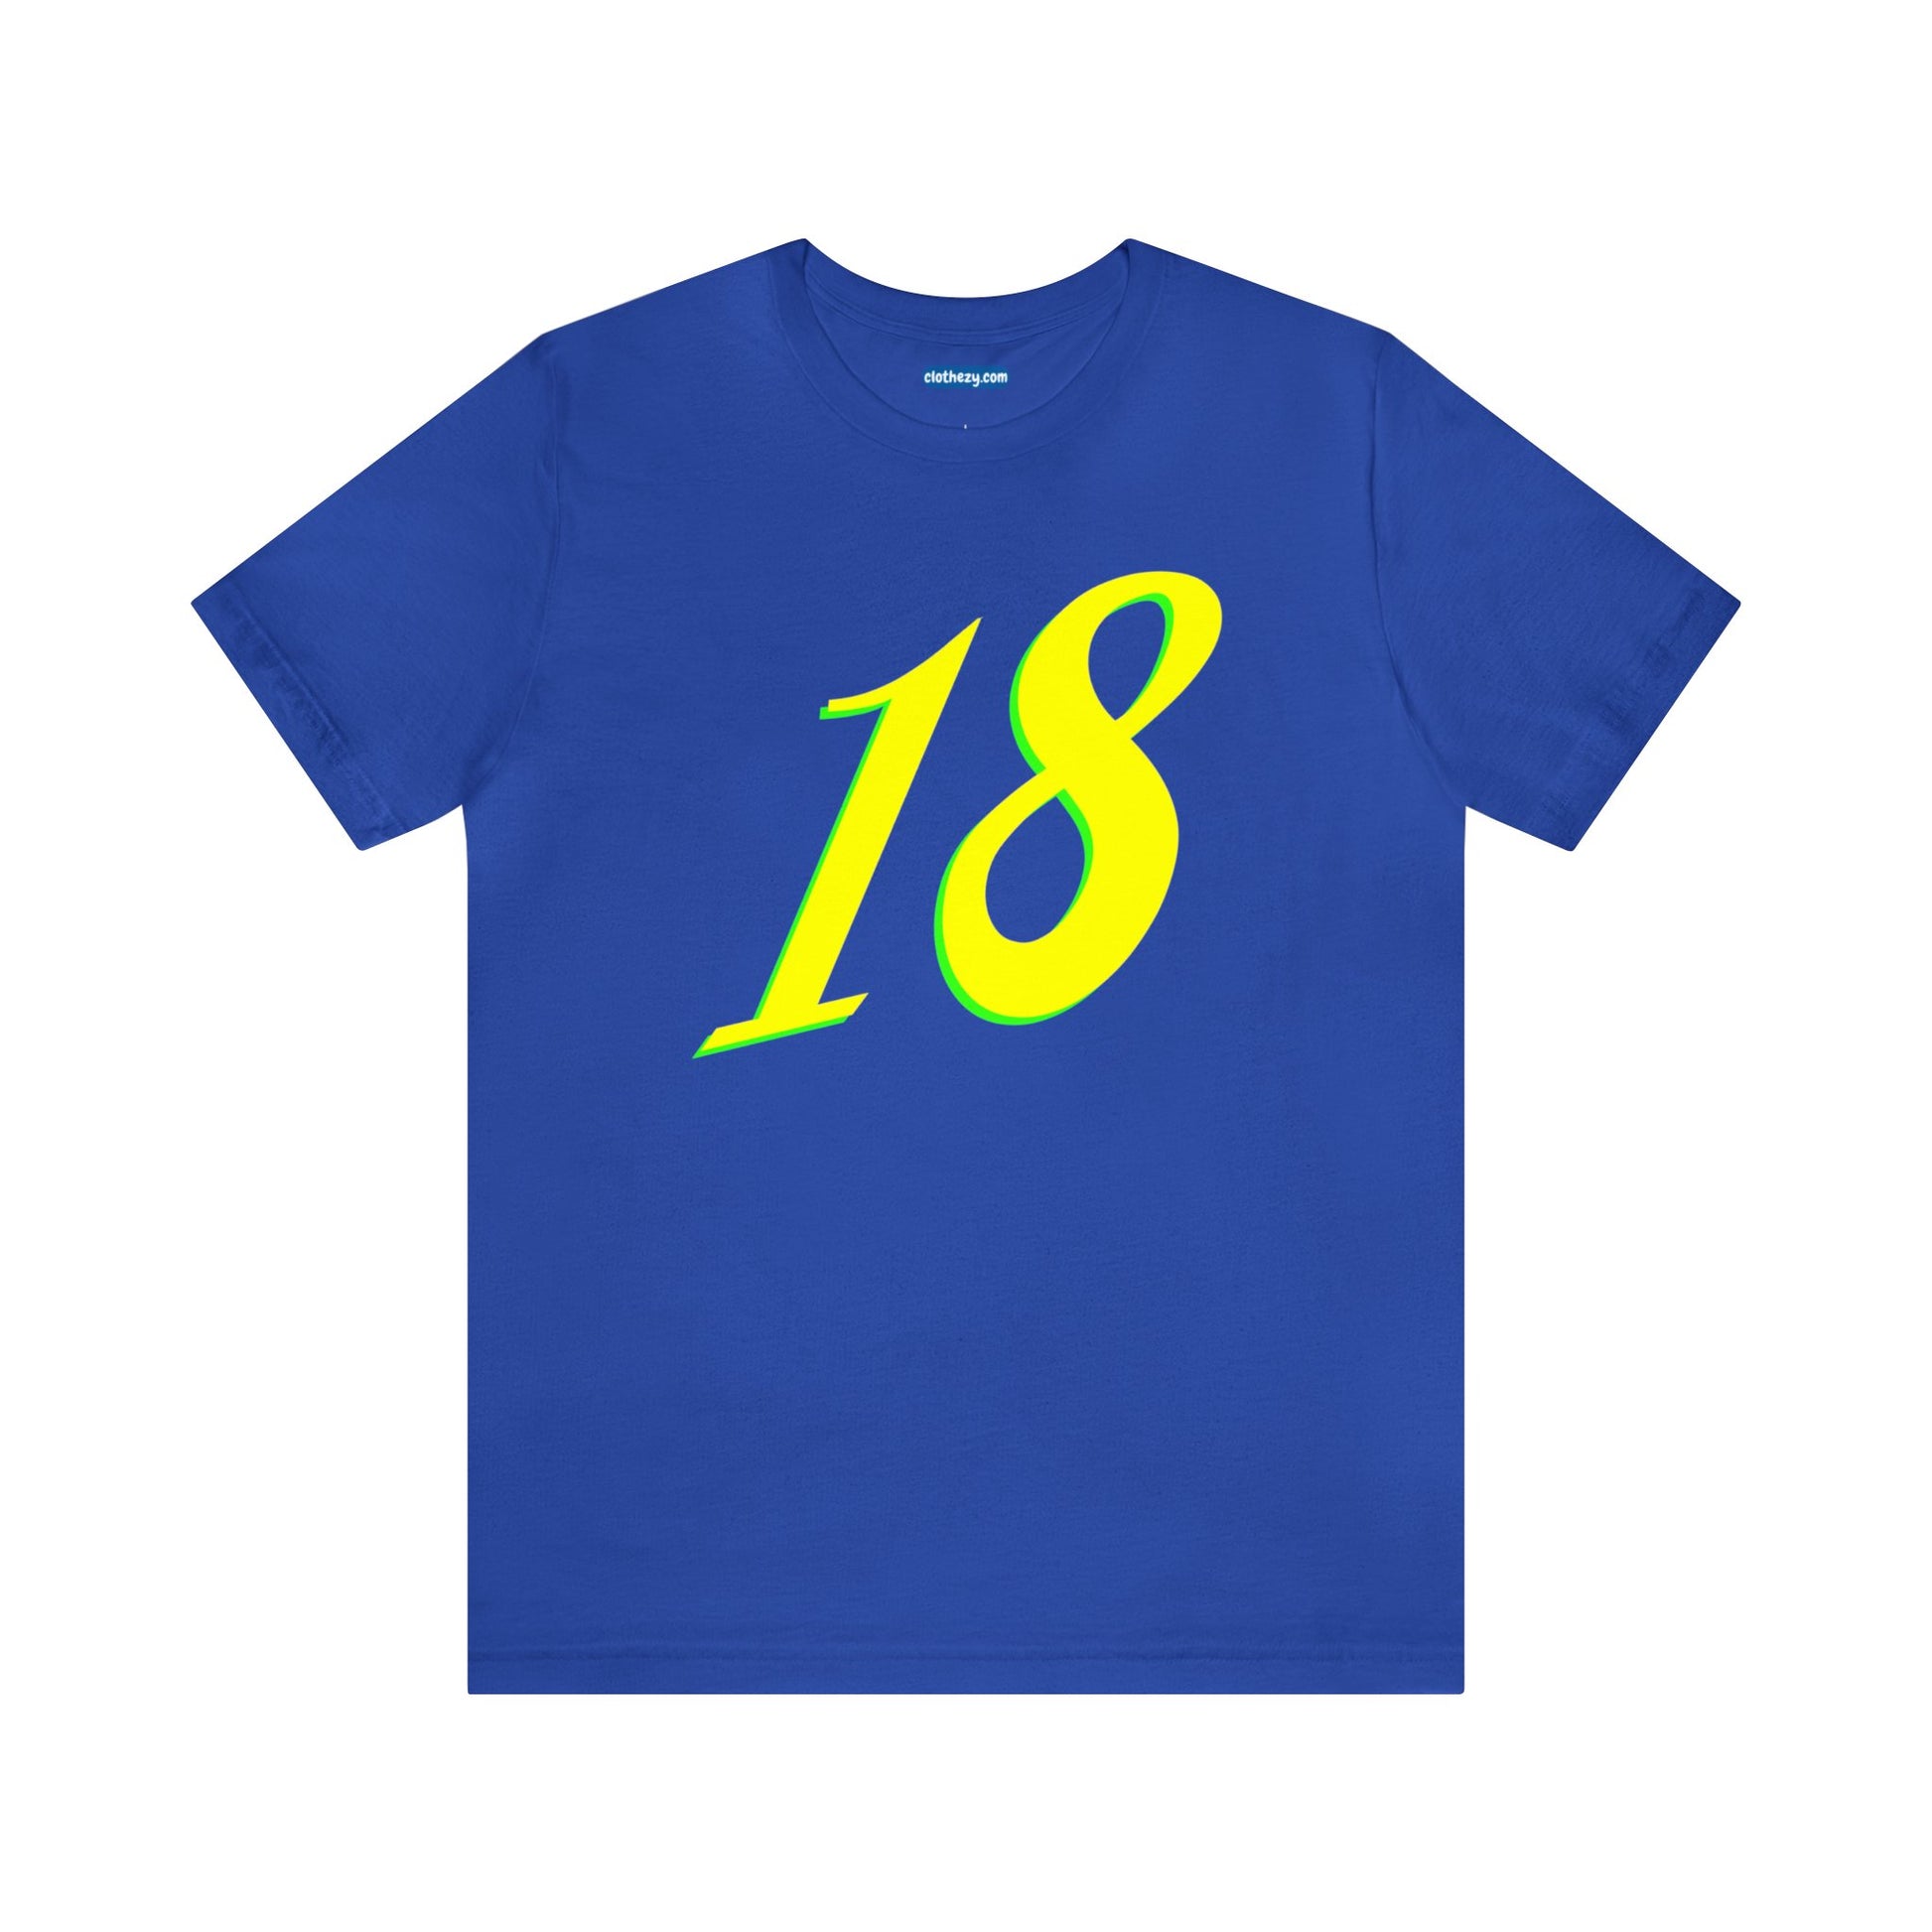 Number 18 Design - Soft Cotton Tee for birthdays and celebrations, Gift for friends and family, Multiple Options by clothezy.com in Royal Blue Size Small - Buy Now